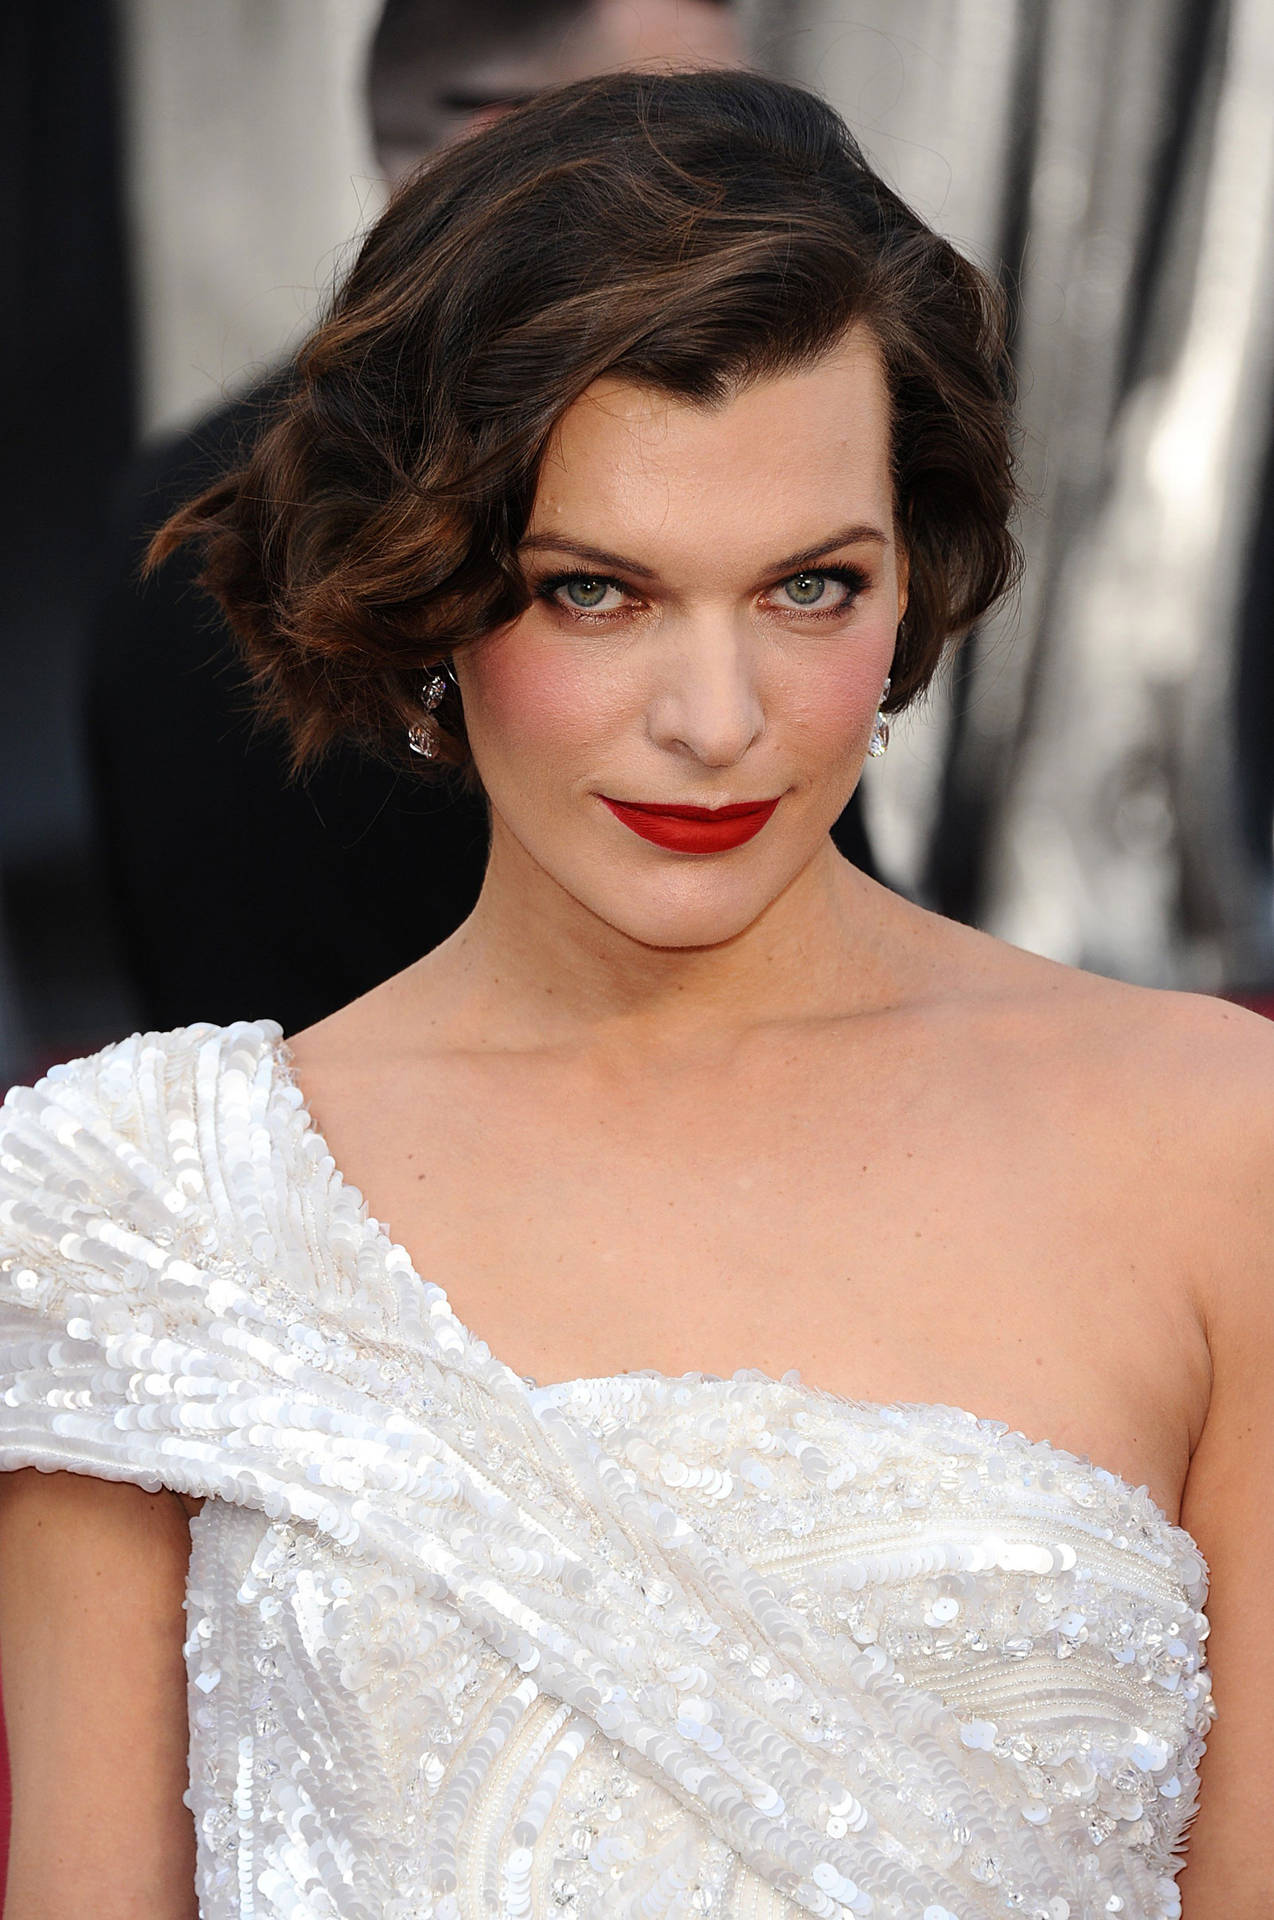 Milla Jovovich Actress White Gown Red Carpet Wallpaper